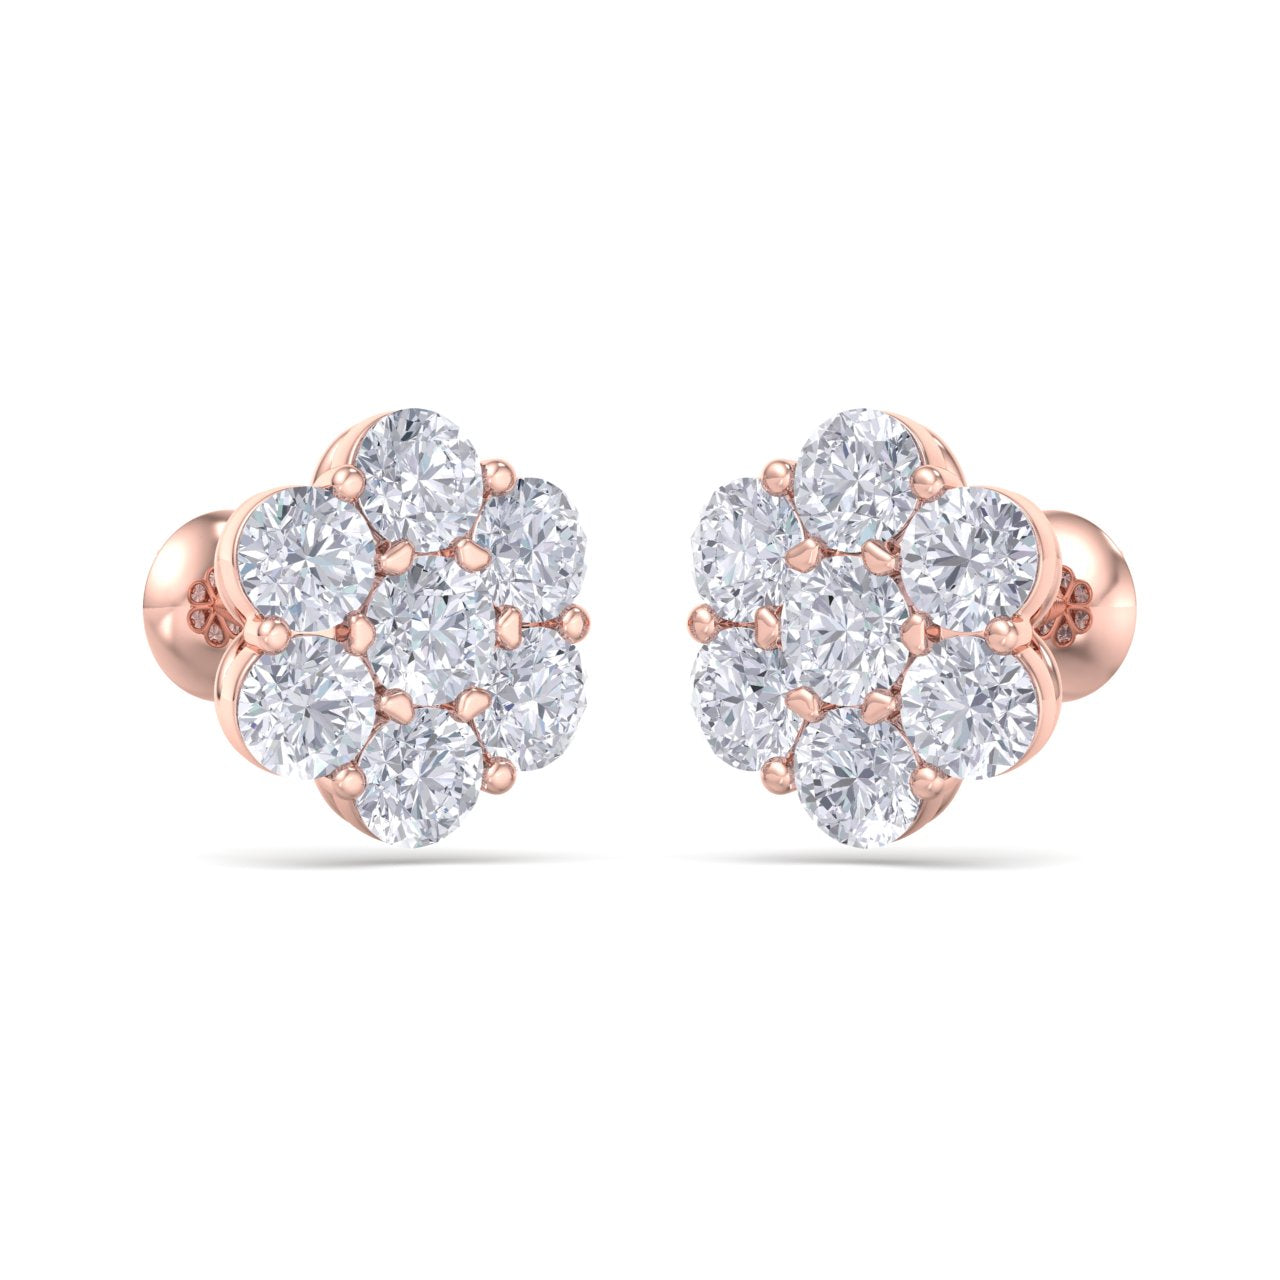 Stud earrings in white gold with white diamonds of 2.79 ct in weight